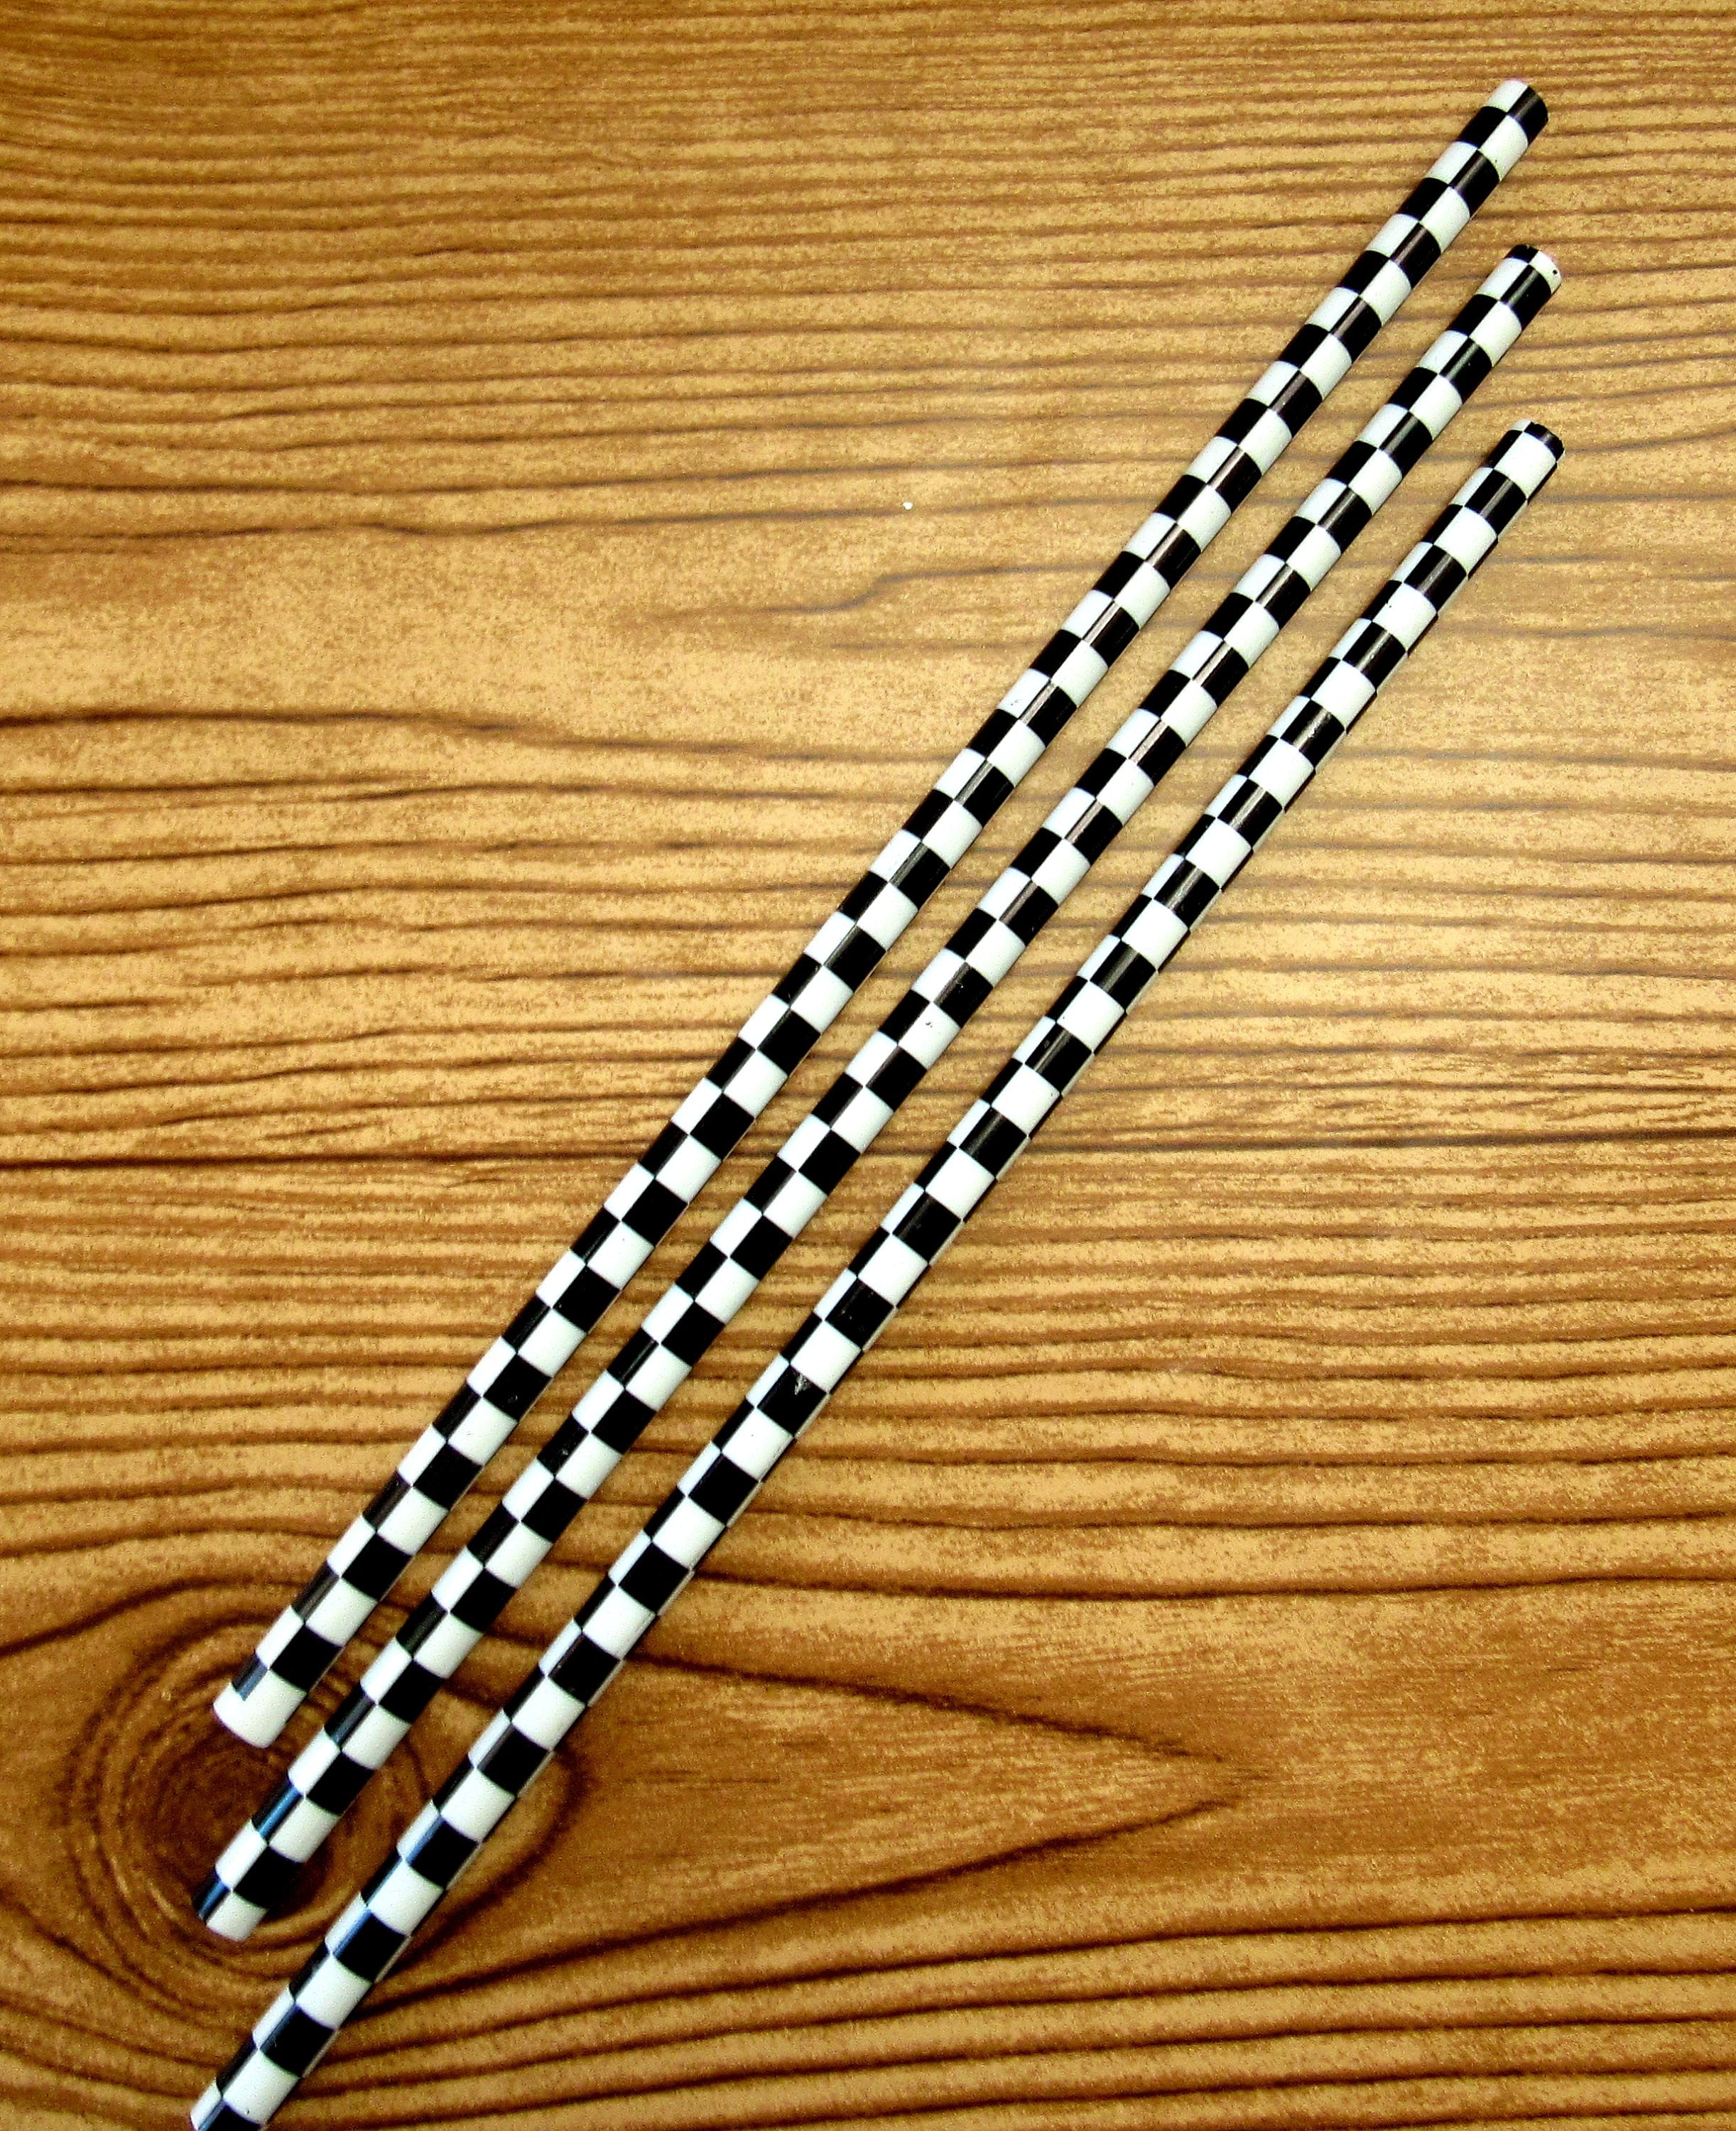 Black and White Straw|Resuable Straw|Plastic Straw|Tumbler Straw|Custom Straw Racing Straw Racing Tumbler Checkered Straw